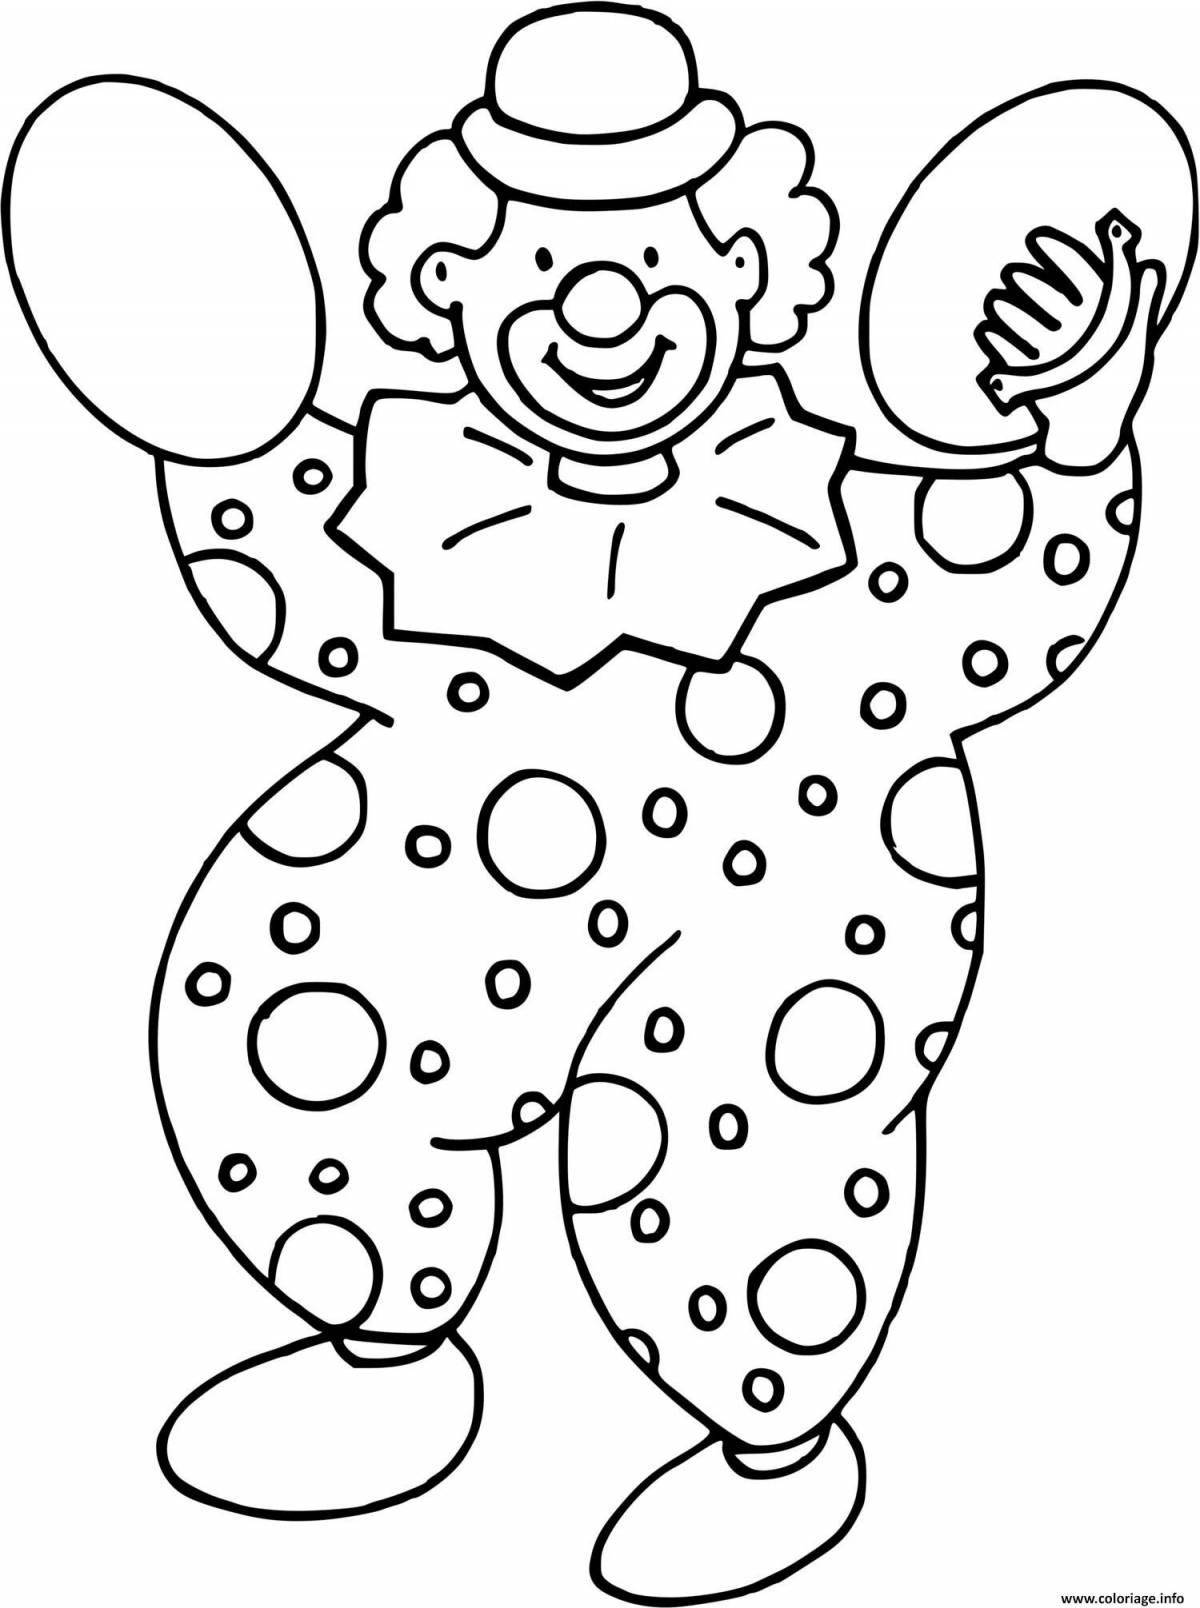 Playful coloring book funny clown for kids